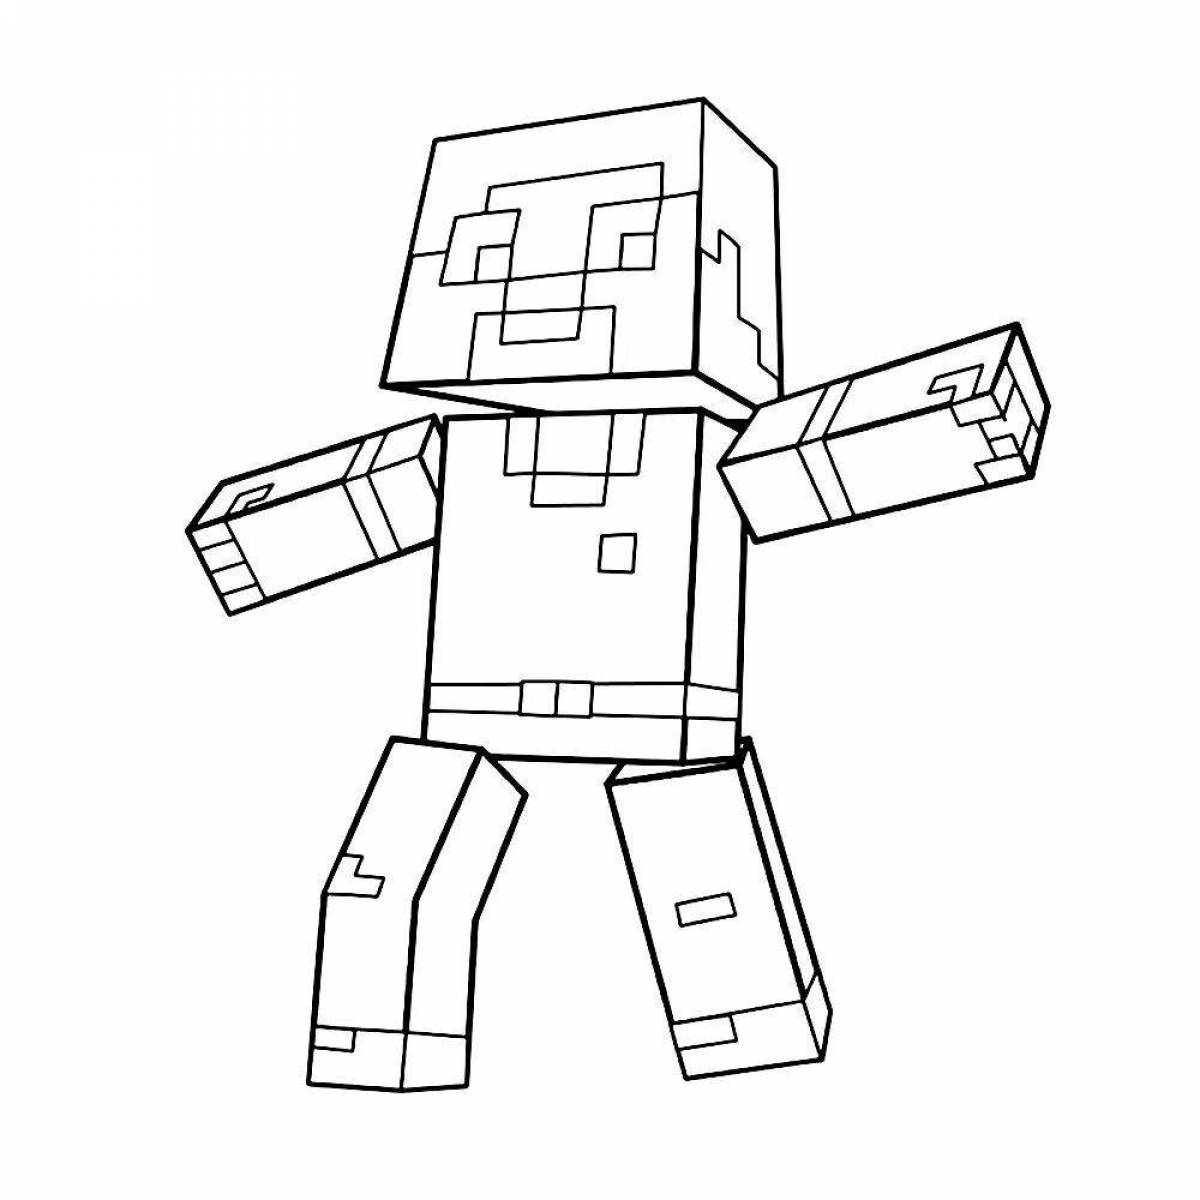 Awesome minecraft skin coloring pages